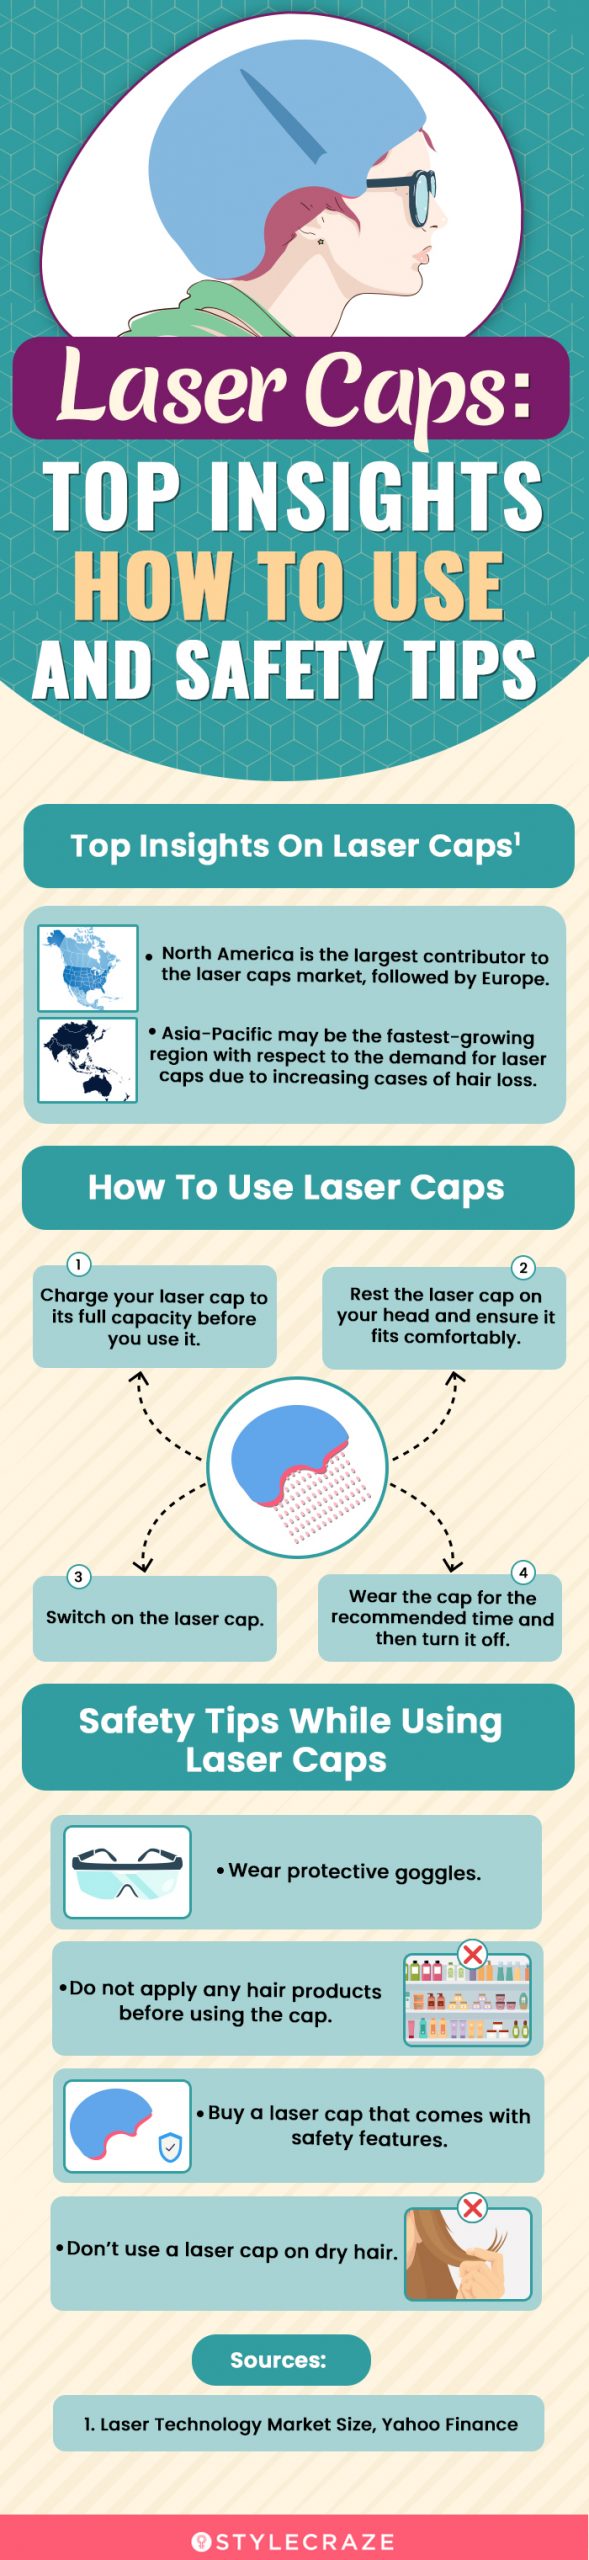 Laser Caps: Top Insights, How To Use, And Safety Tips [infographic]